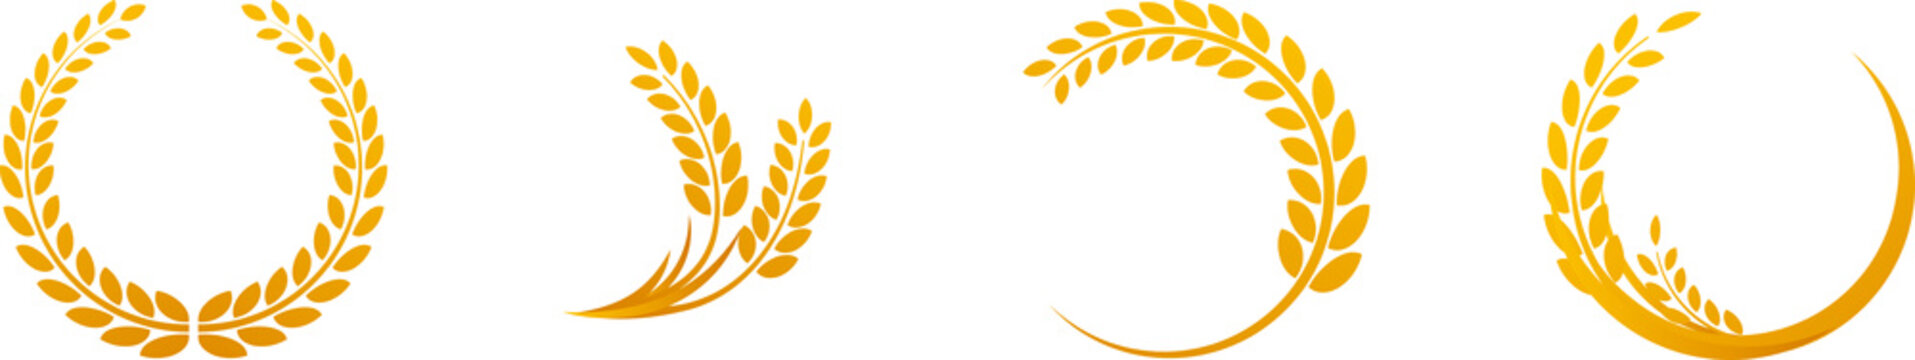 Agricultural Wheat Field Logo PNG Transparent Image And Clipart Image For  Free Download - Lovepik | 401745917